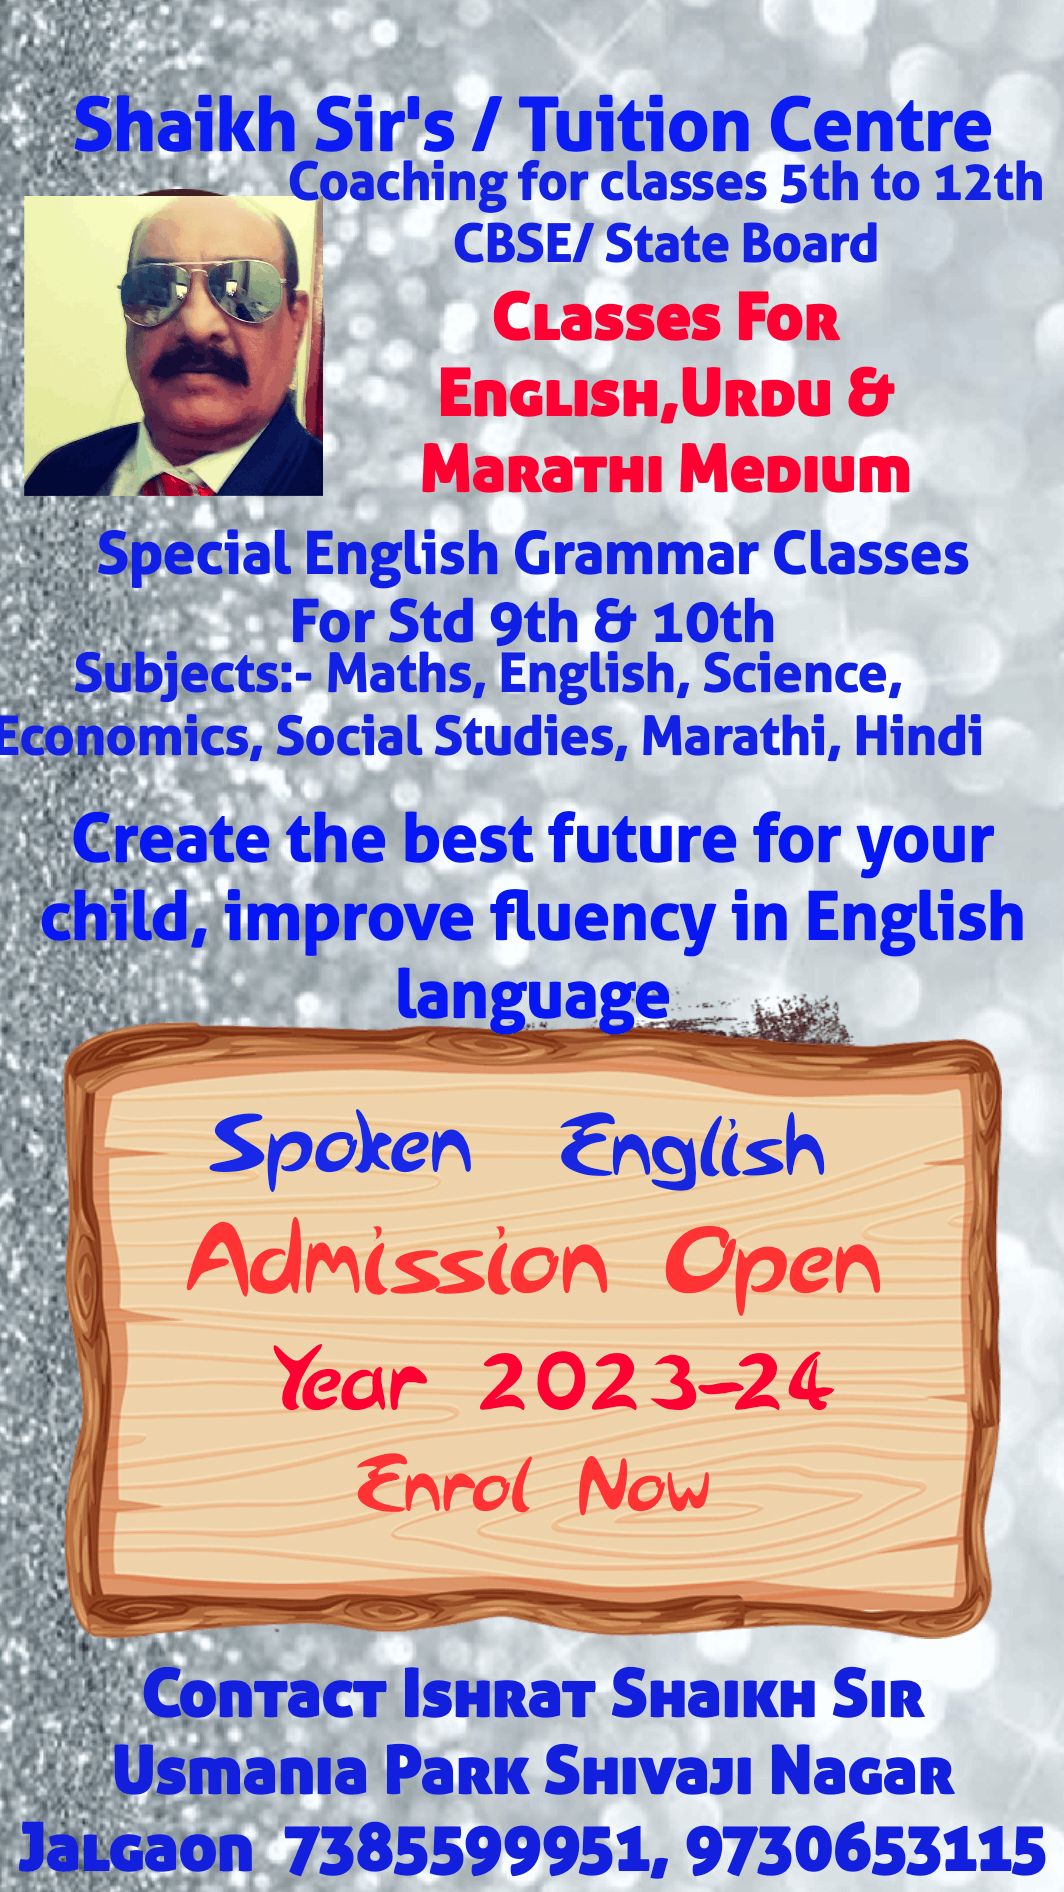 Class 11th/ 12th Tuition, Class 9th/ 10th Tuition, Economics, English, Mathematics; Exp: More than 15 year